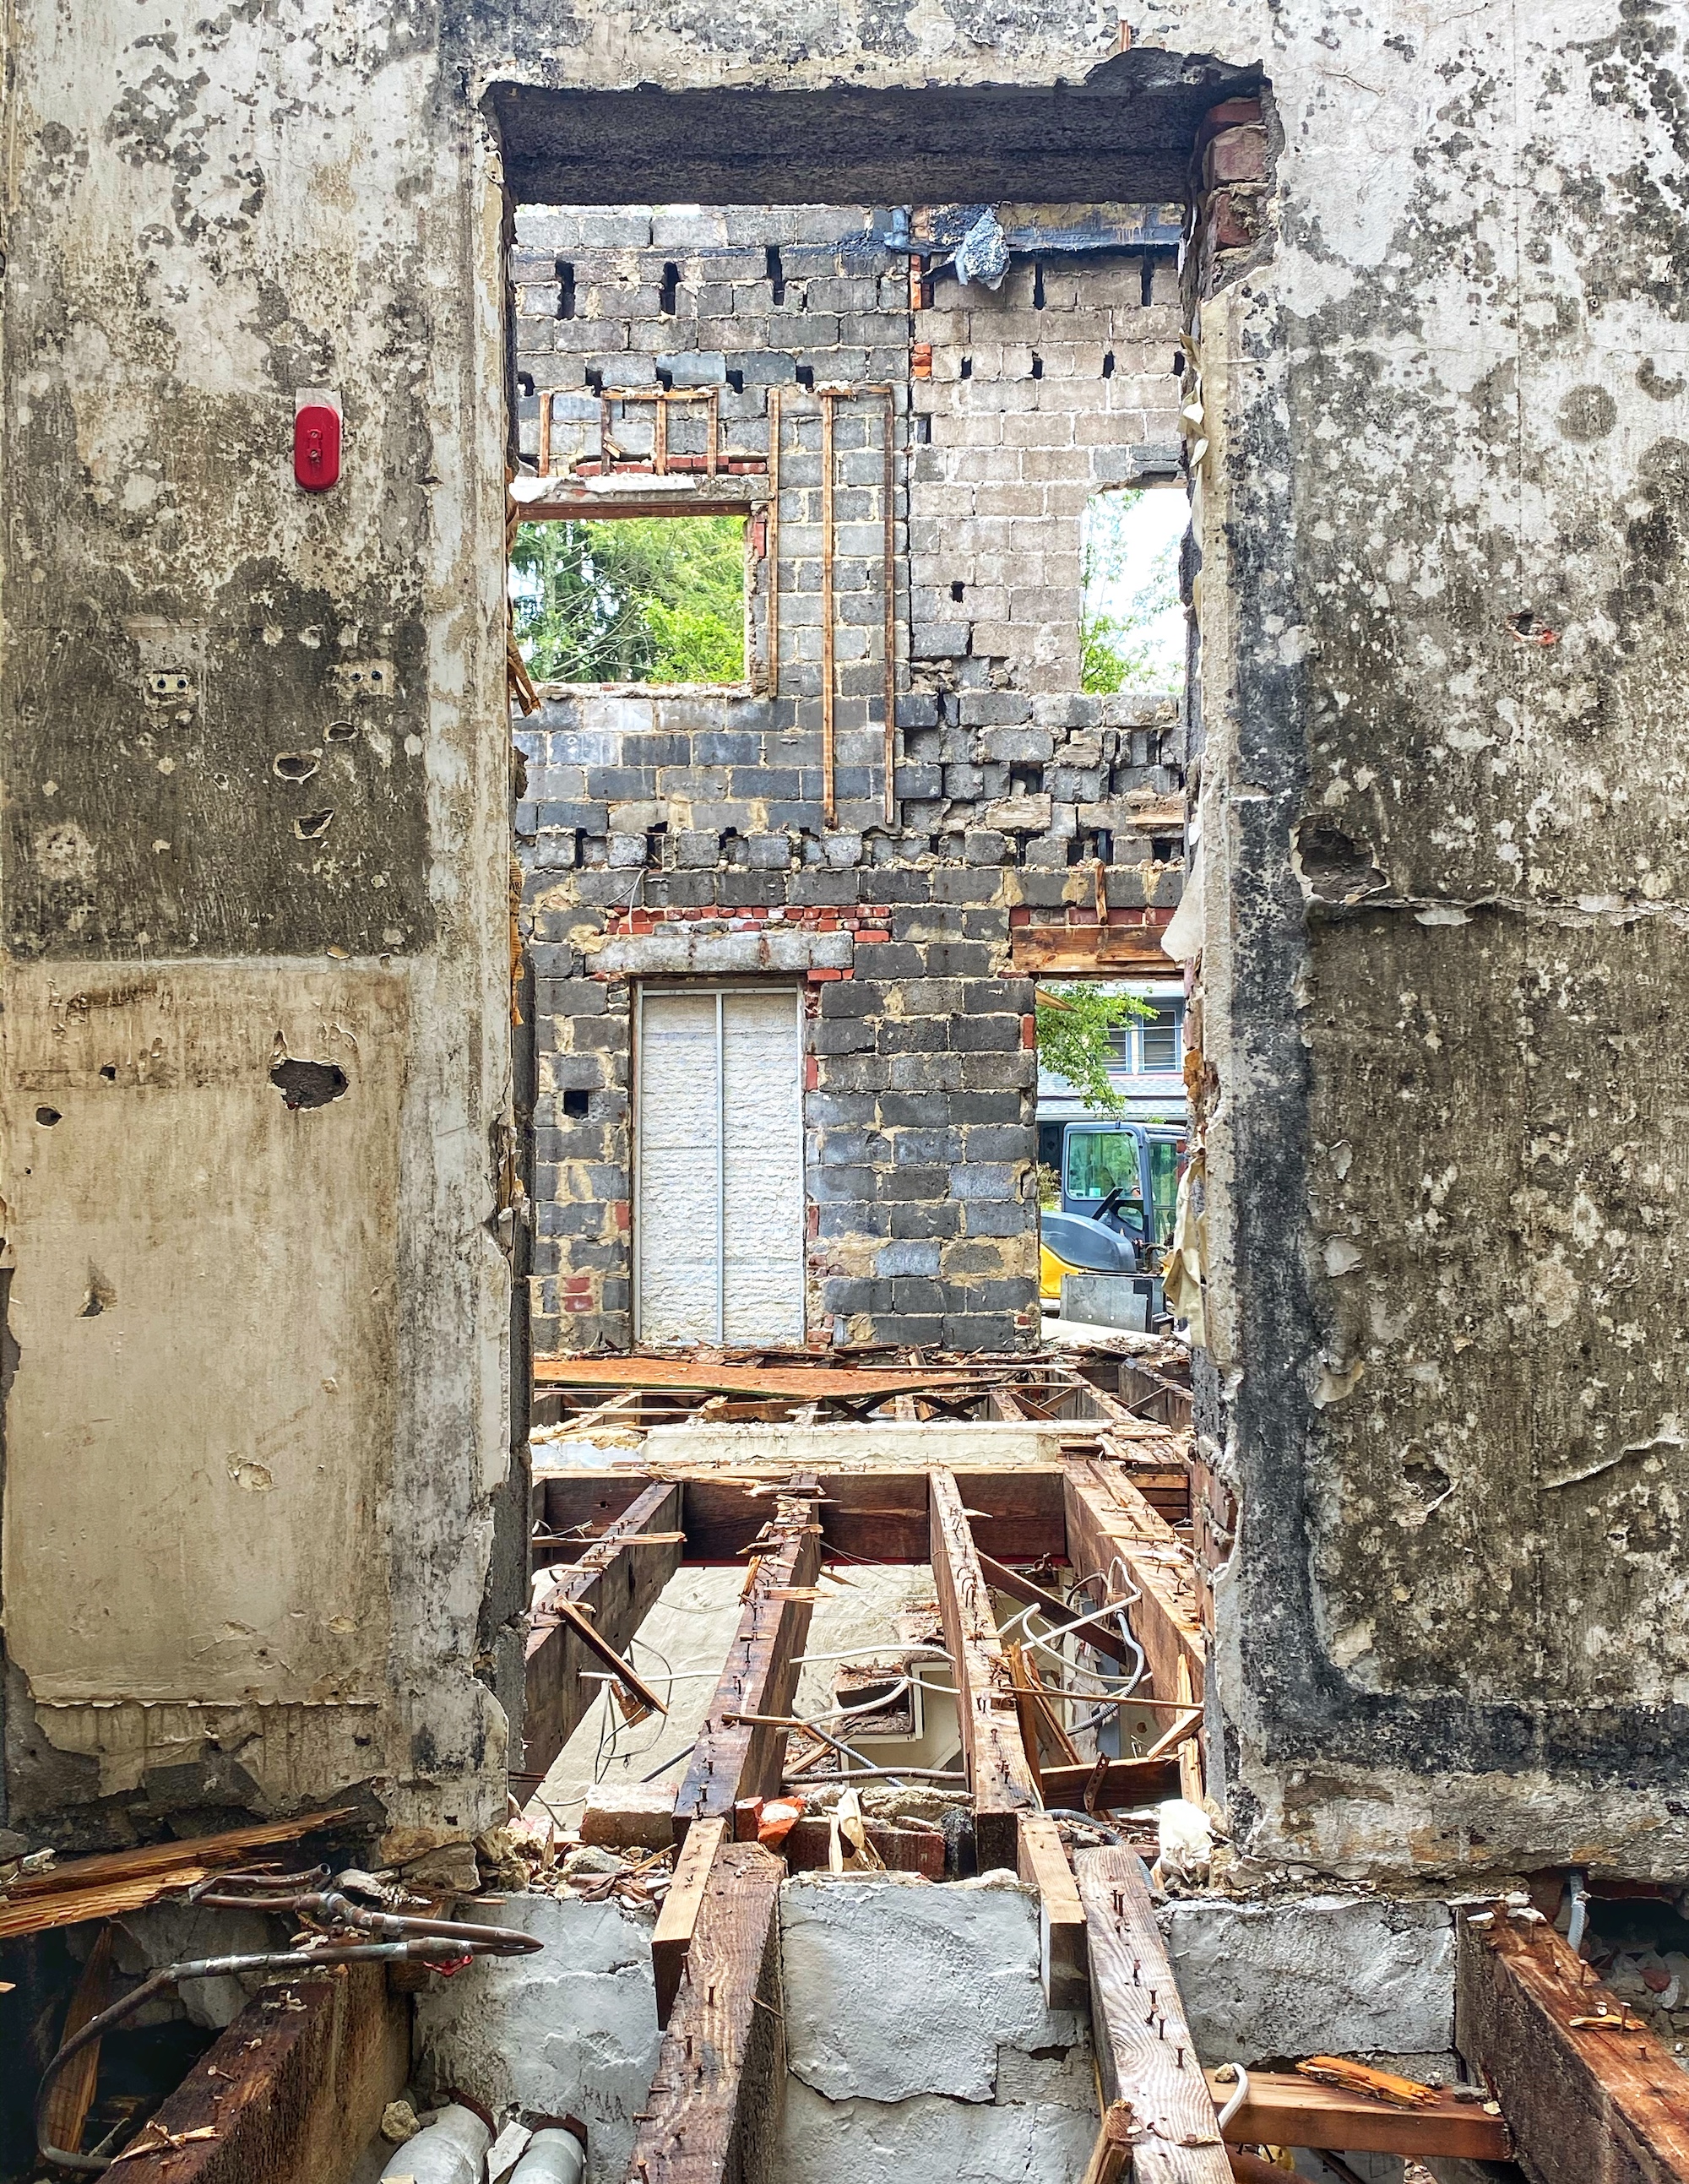 A building being torn down, seen through an open area that once held a door but is now just concrete.